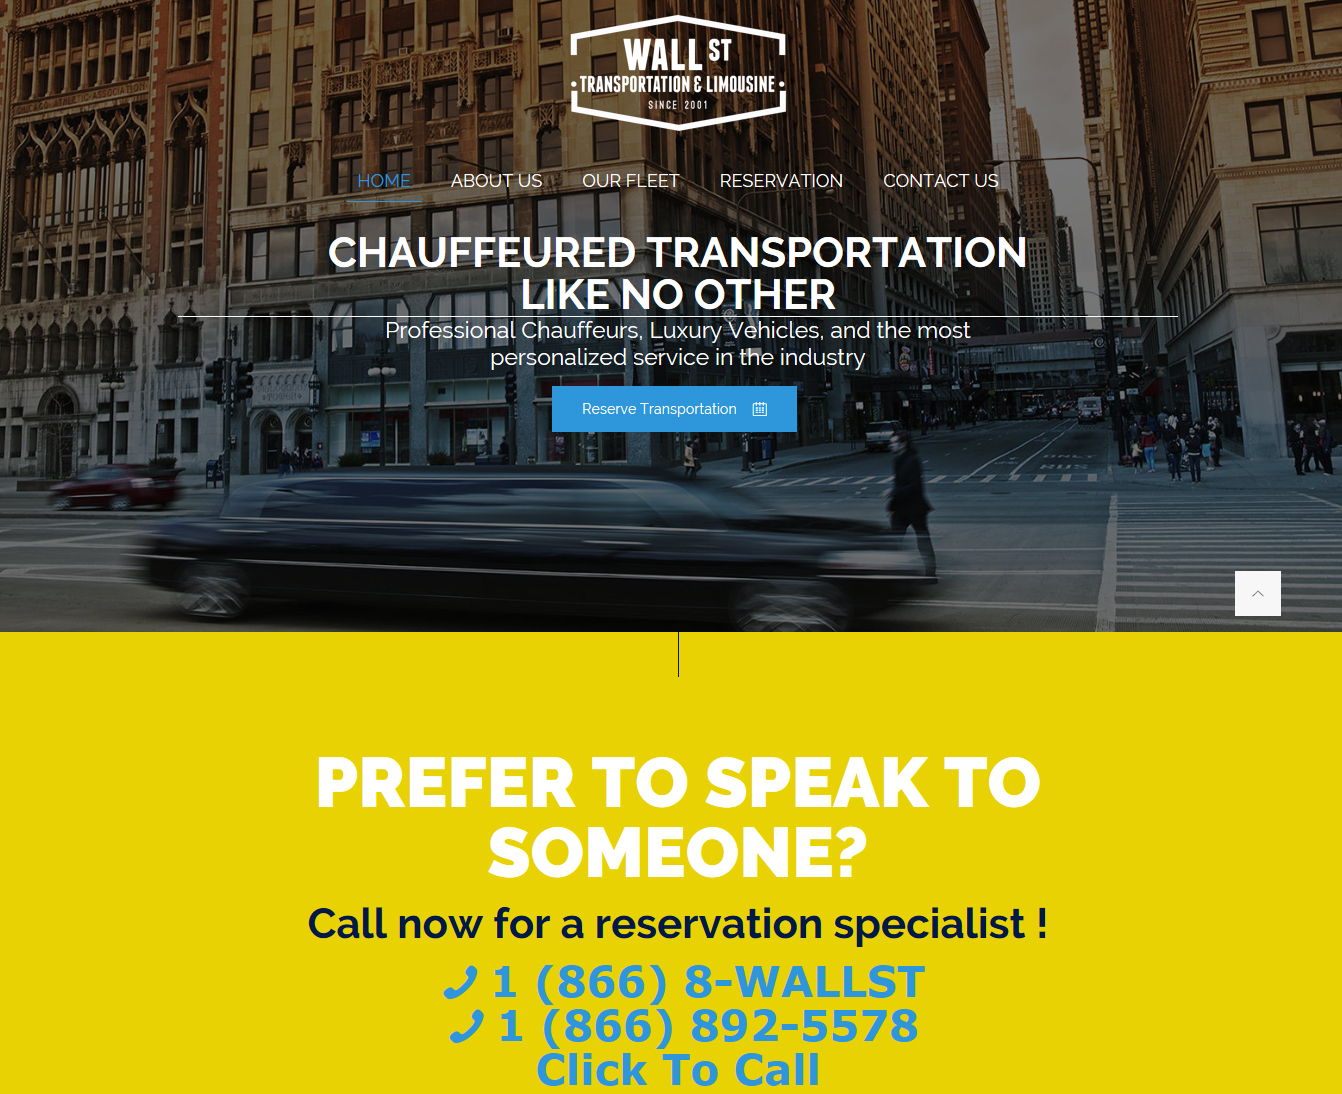 TRANSPORTATION AND LIMO SERVICE